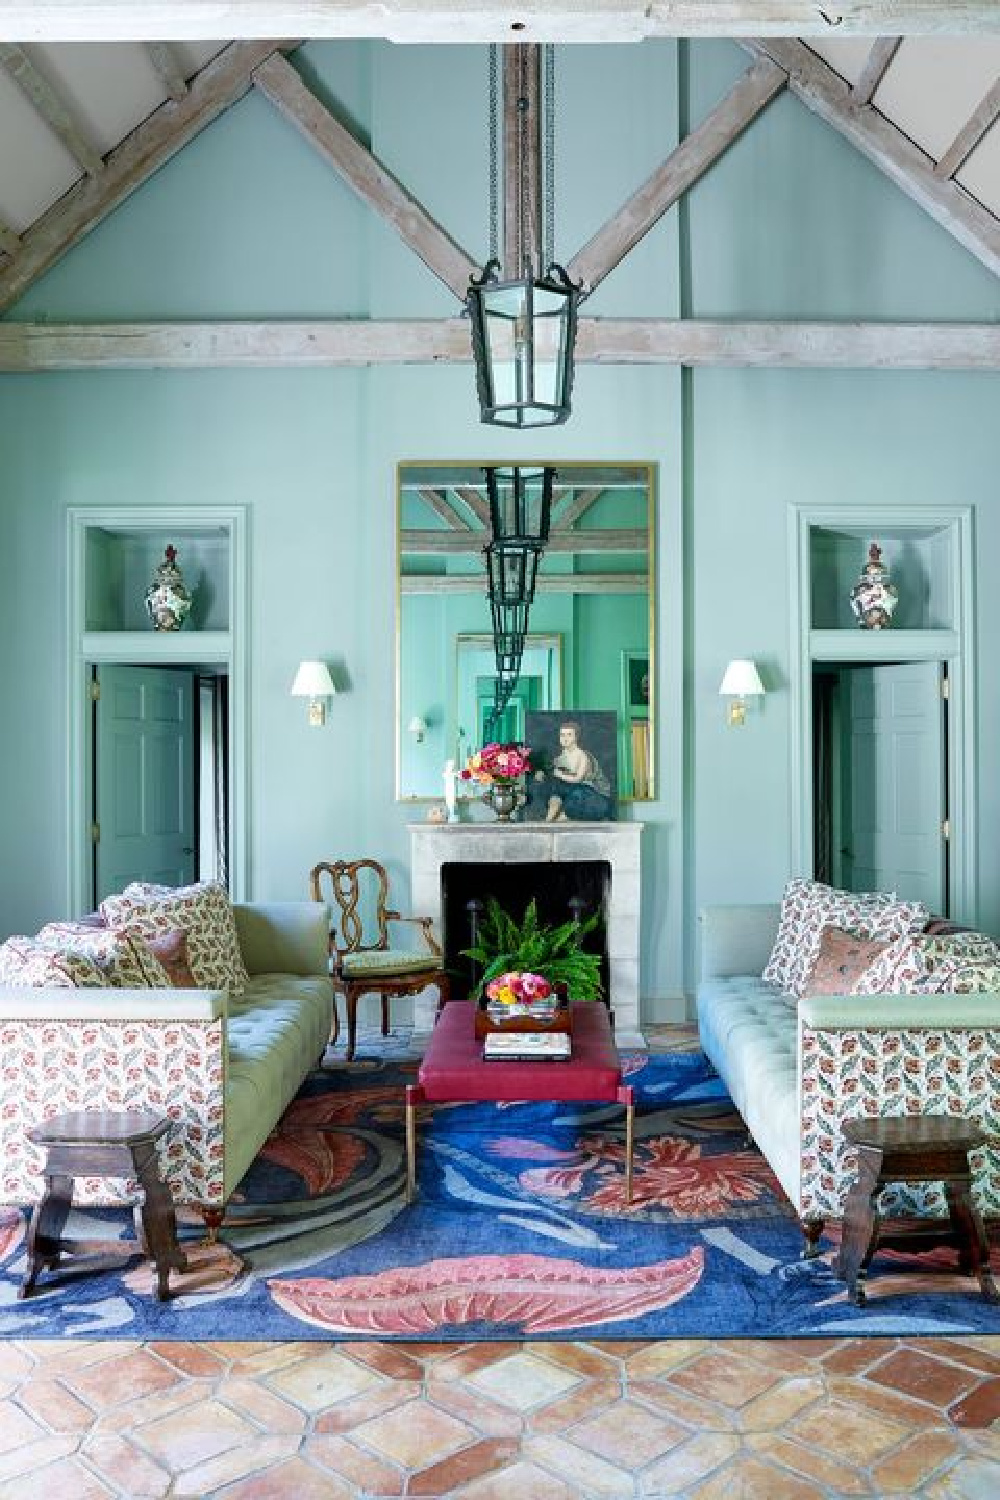 Turquoise blue walls in a family room with lofty ceiling - House Beautiful. #turquoise #beachylivingroom